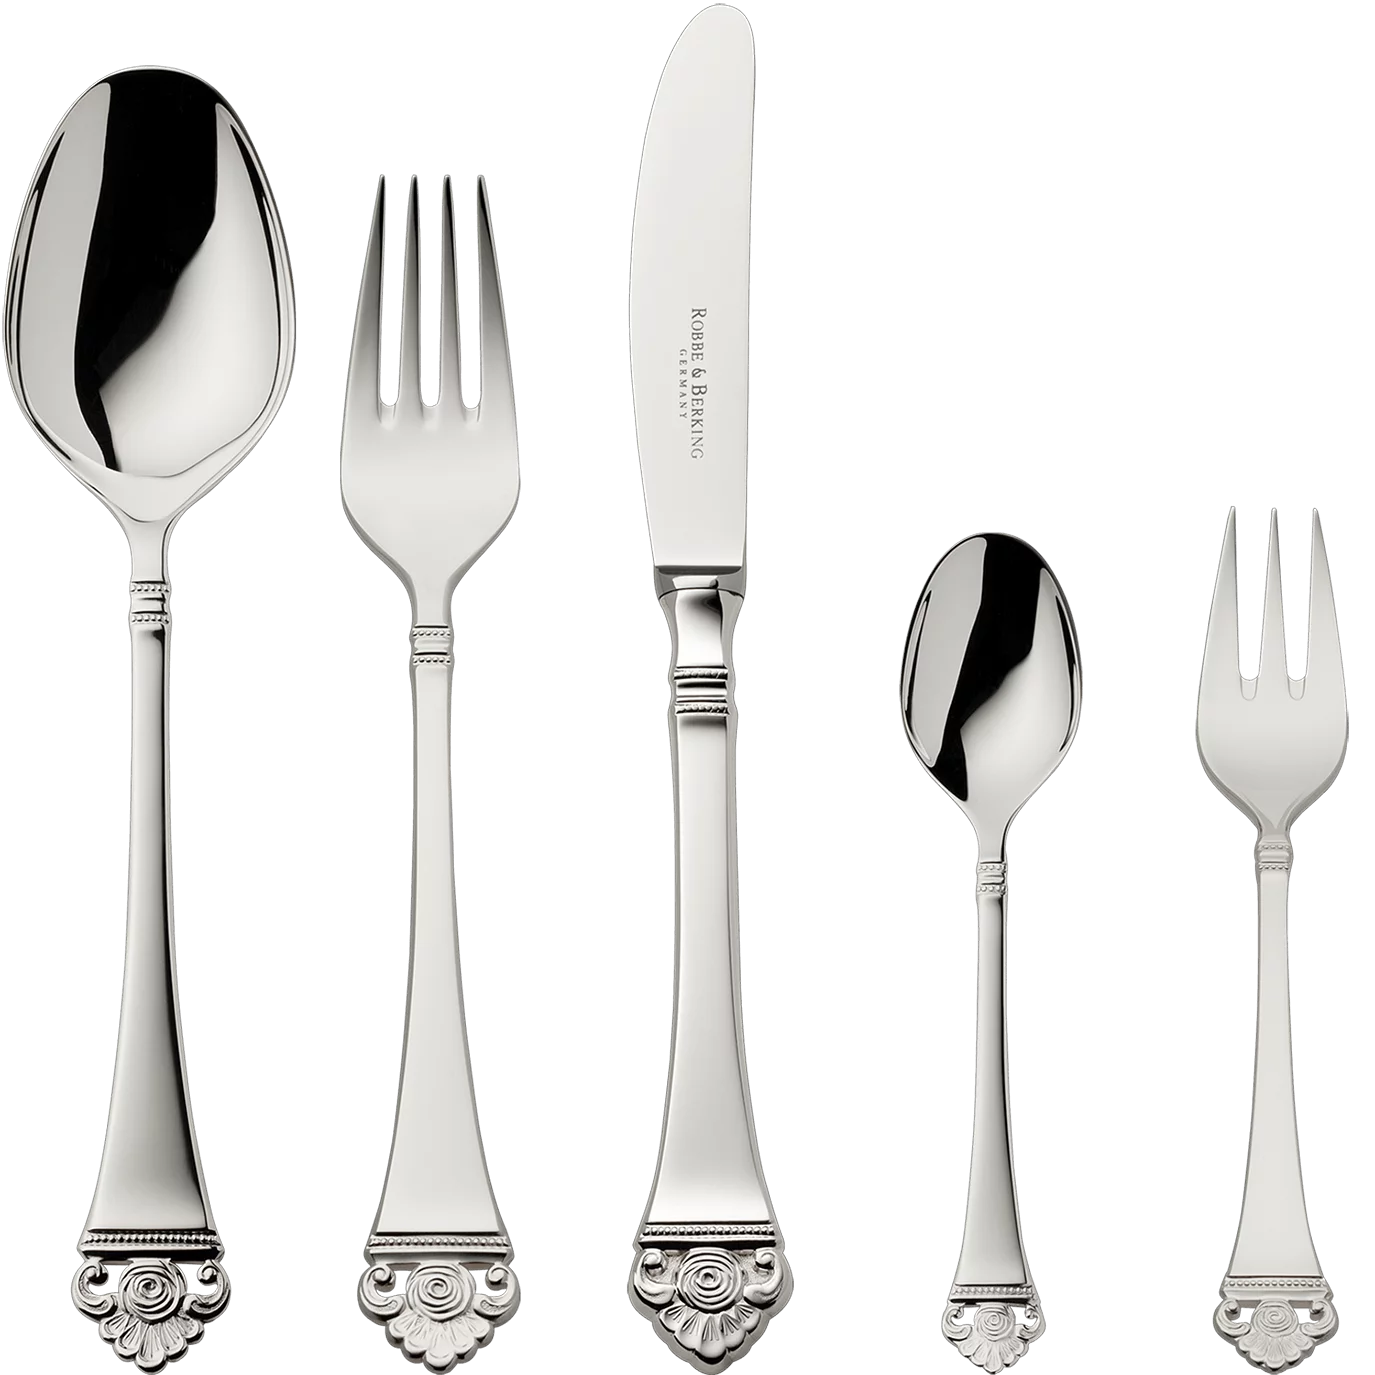 Rosenmuster 5-piece place setting (925 Sterling Silver)